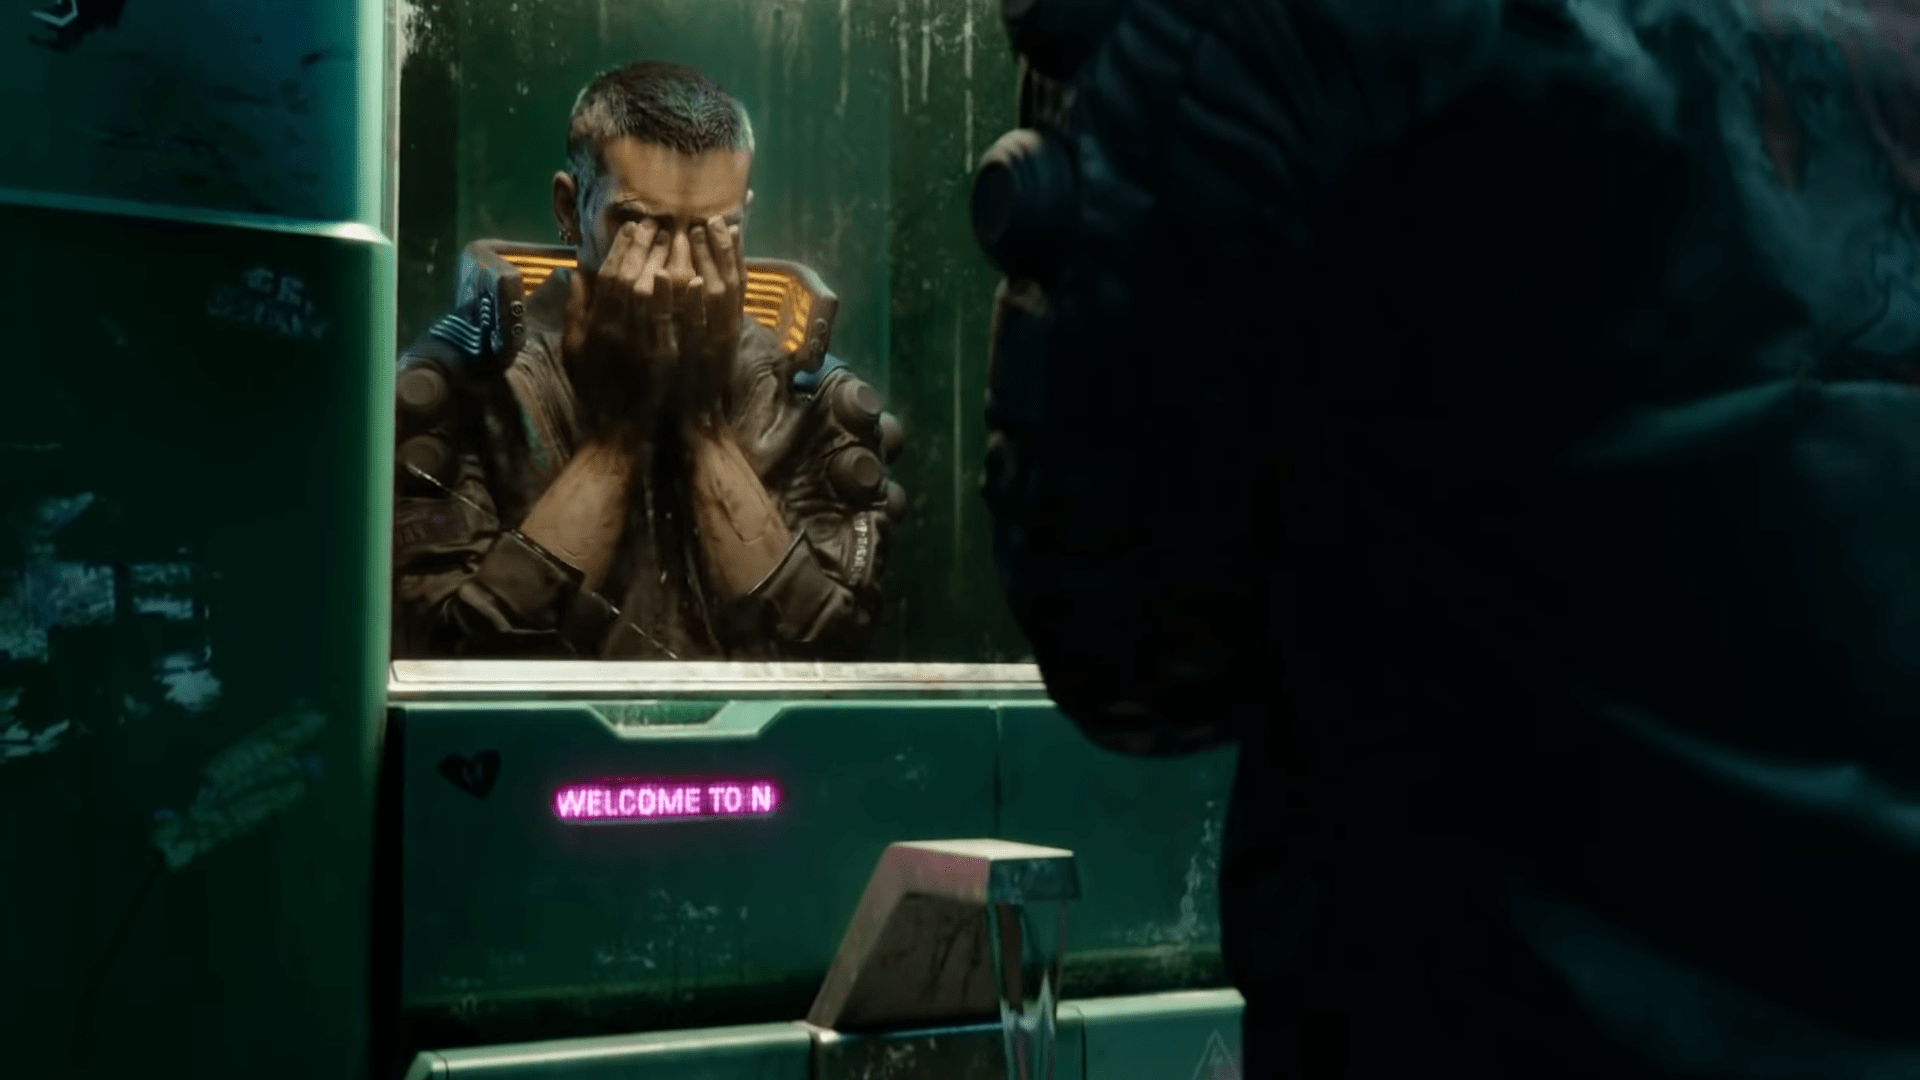 Cyberpunk 2077: Potential Similarities With Its Tabletop Predecessor